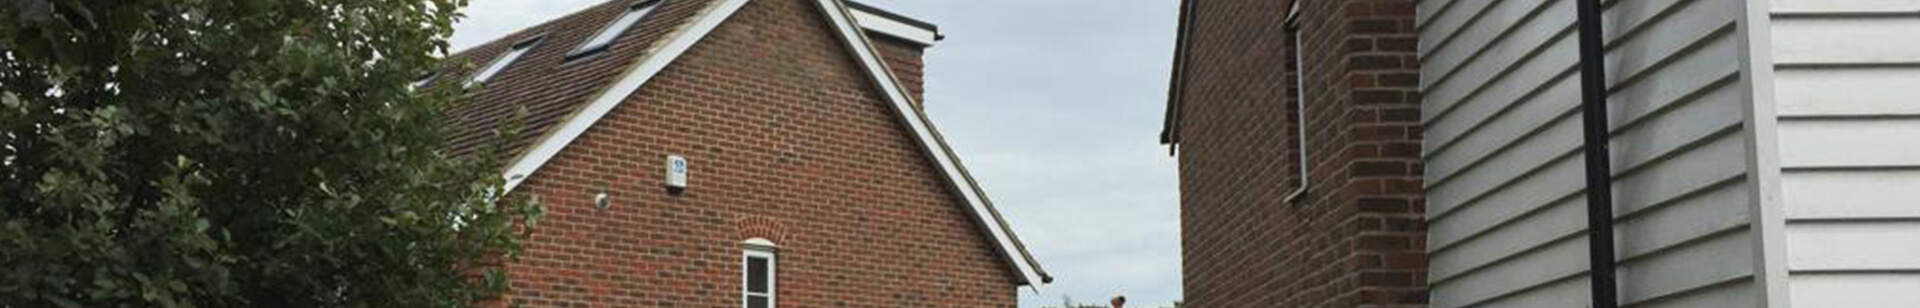 WBS Loft Conversions offered in kent